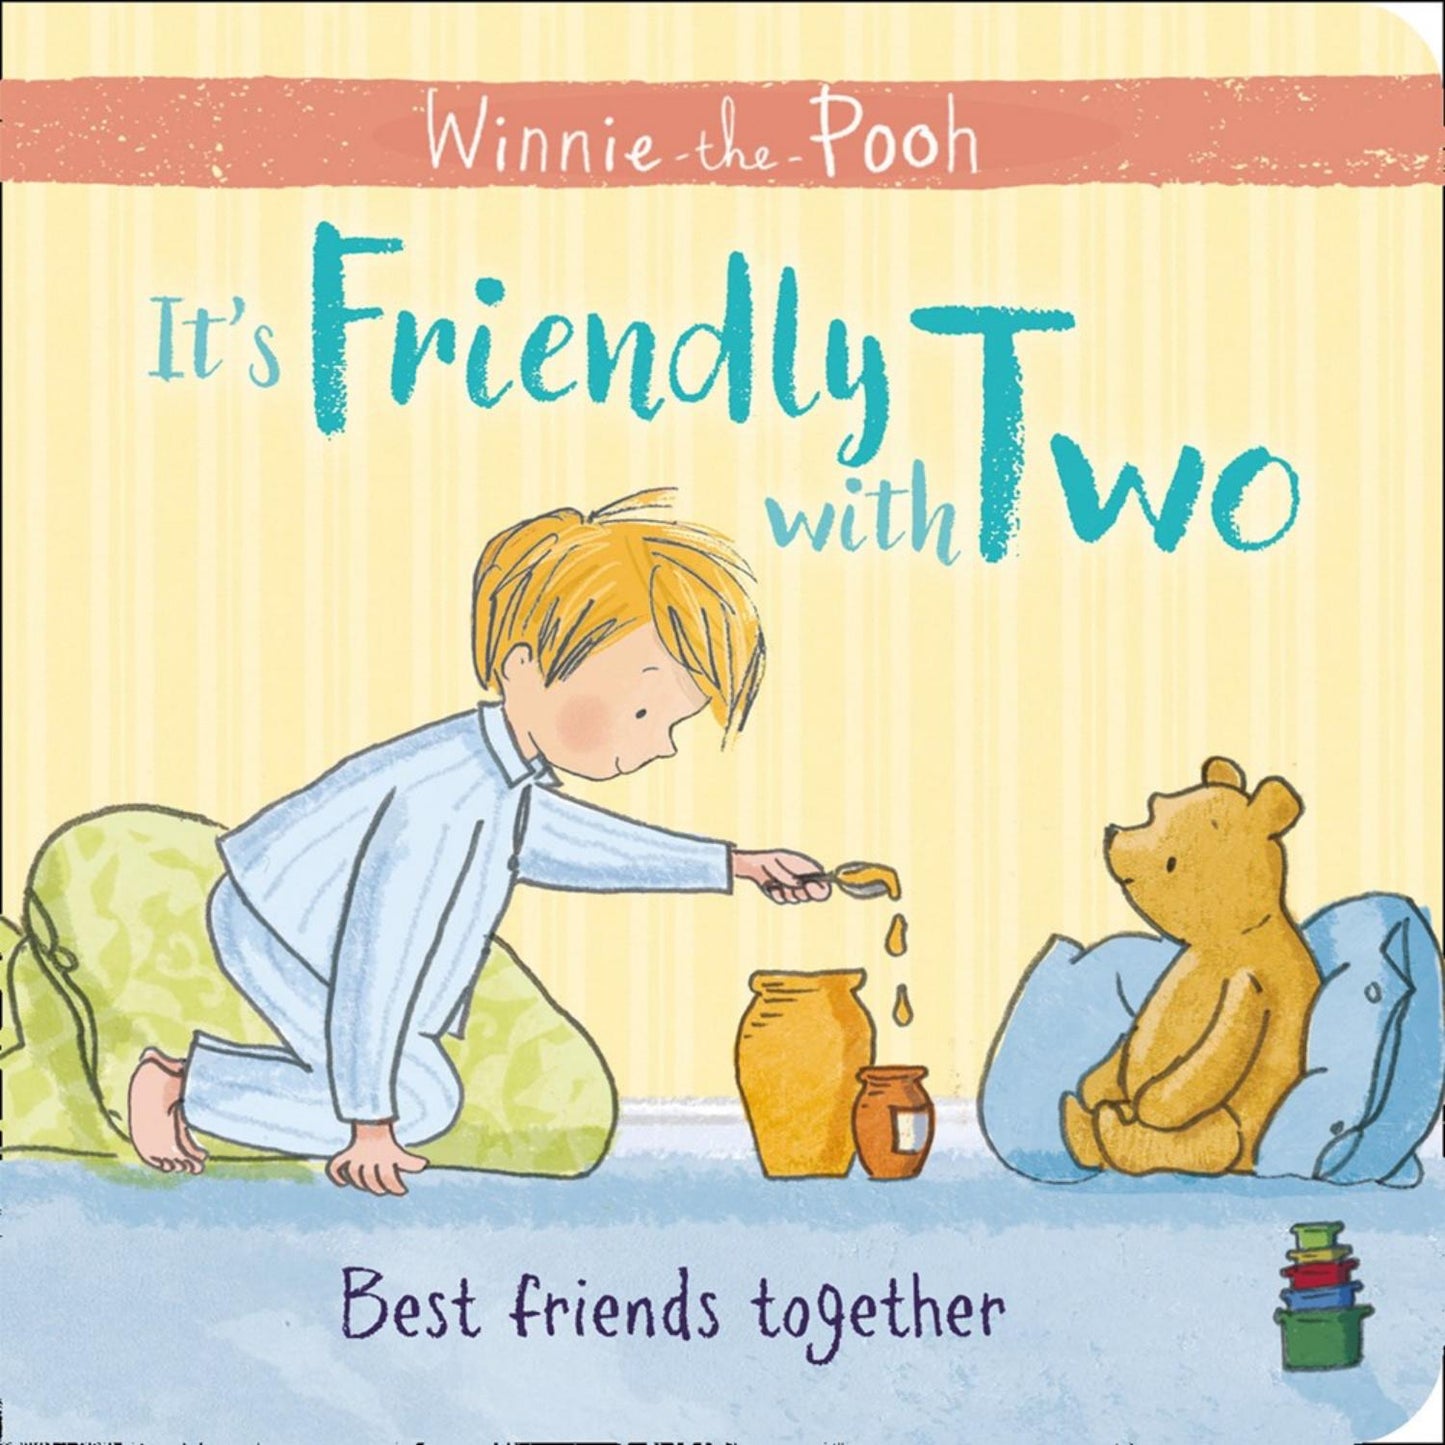 Winnie-the-Pooh - It's Friendly with Two – Best Friends Together | Board Book